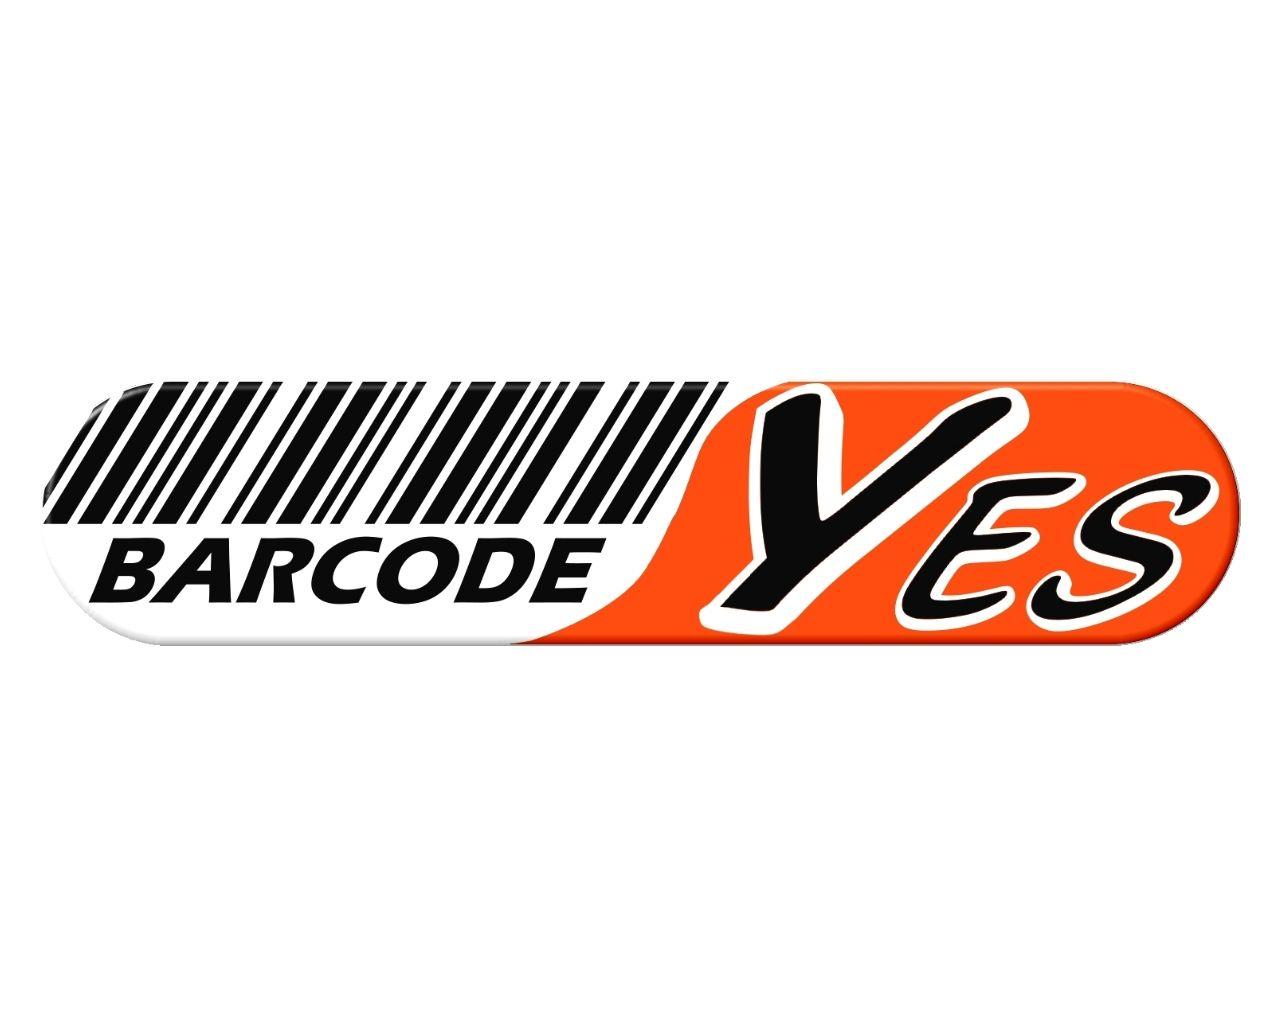 Barcode readers, mobile computers, data collectORS and RFID systems